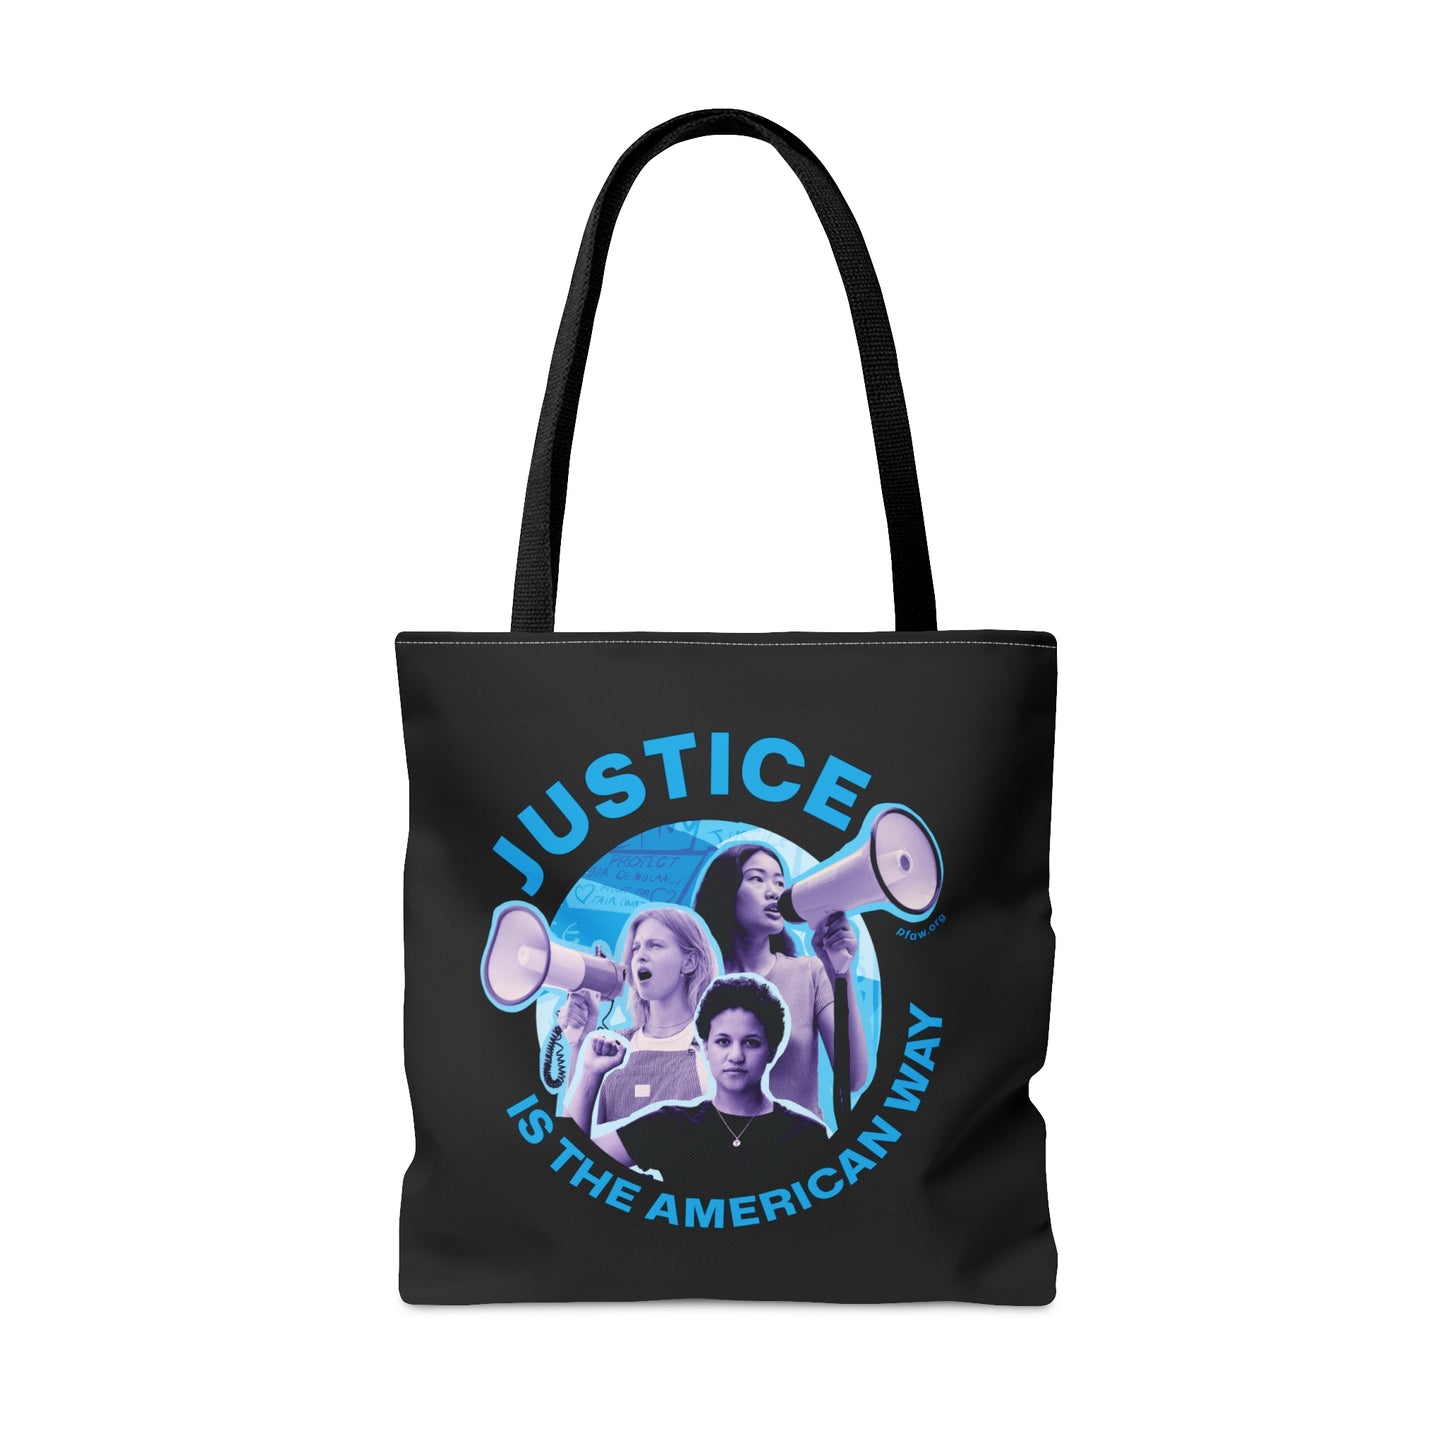 Justice is the American Way Tote - Black